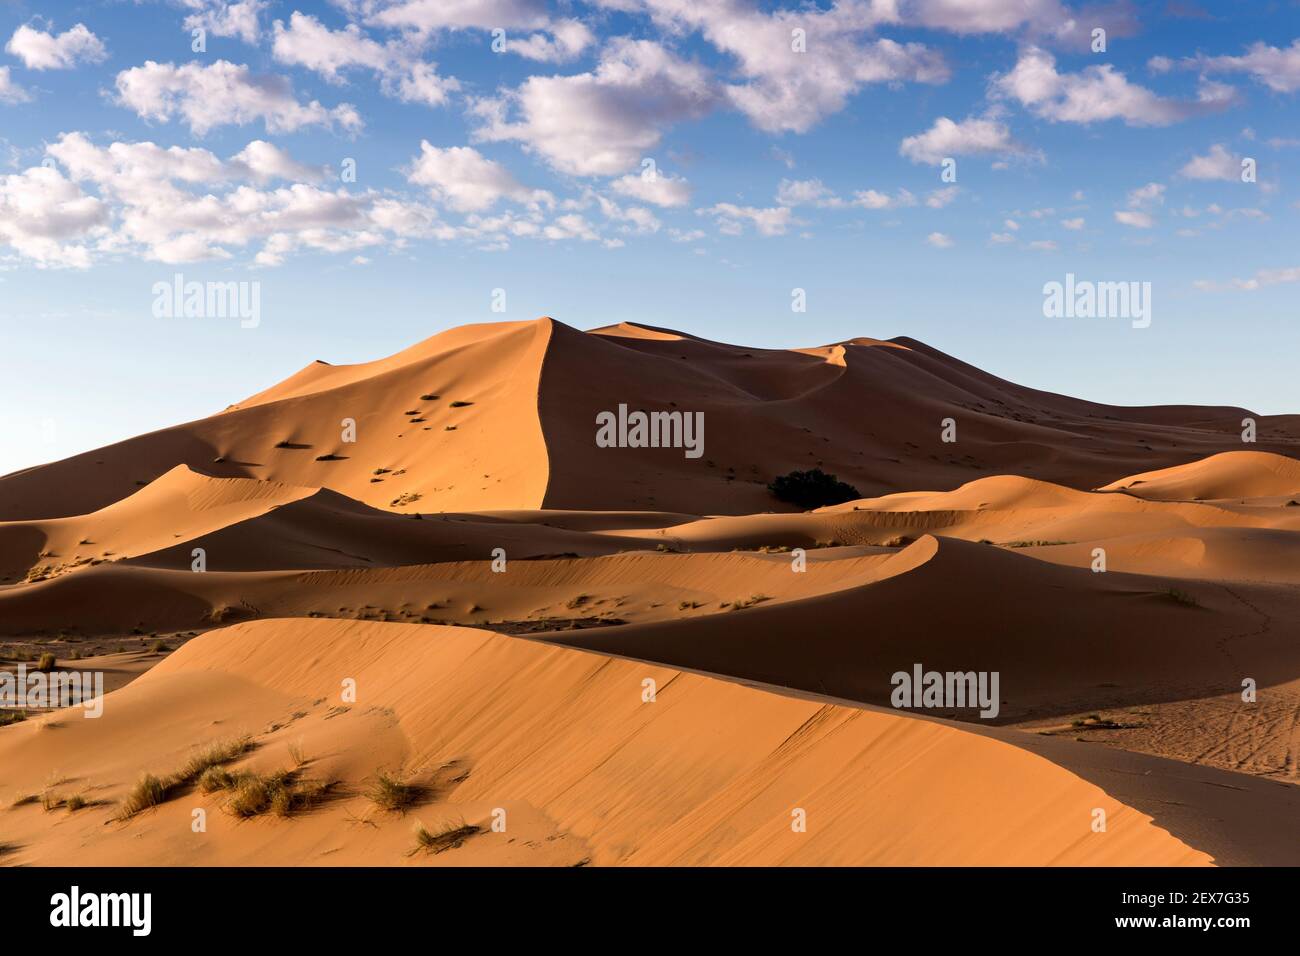 Morocco, Merzouga, the Erg Chebbi Dunes  at sunrise, the desert dunes extend 30km and reach heights of 250 meters Stock Photo